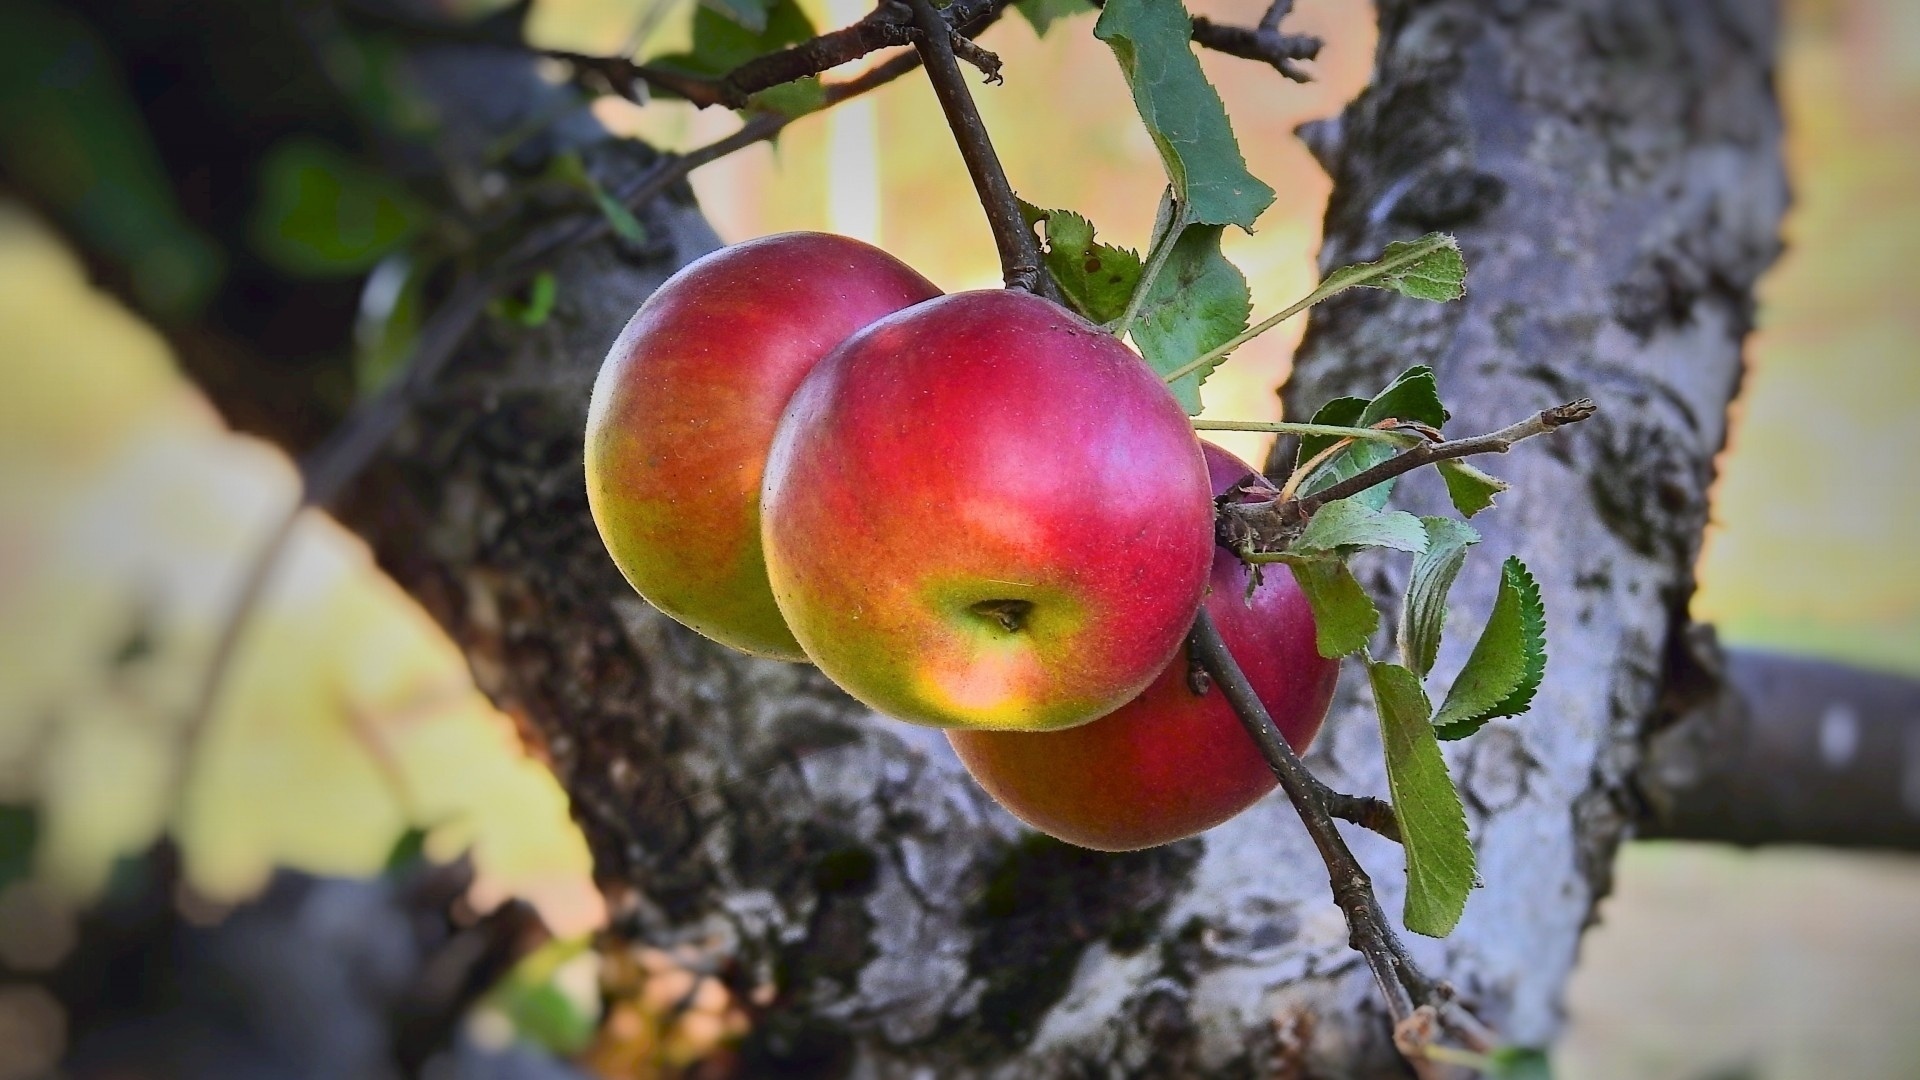 Apple tree wallpapers, Tranquil scenery, Fruits dangling, Nature's bliss, 1920x1080 Full HD Desktop